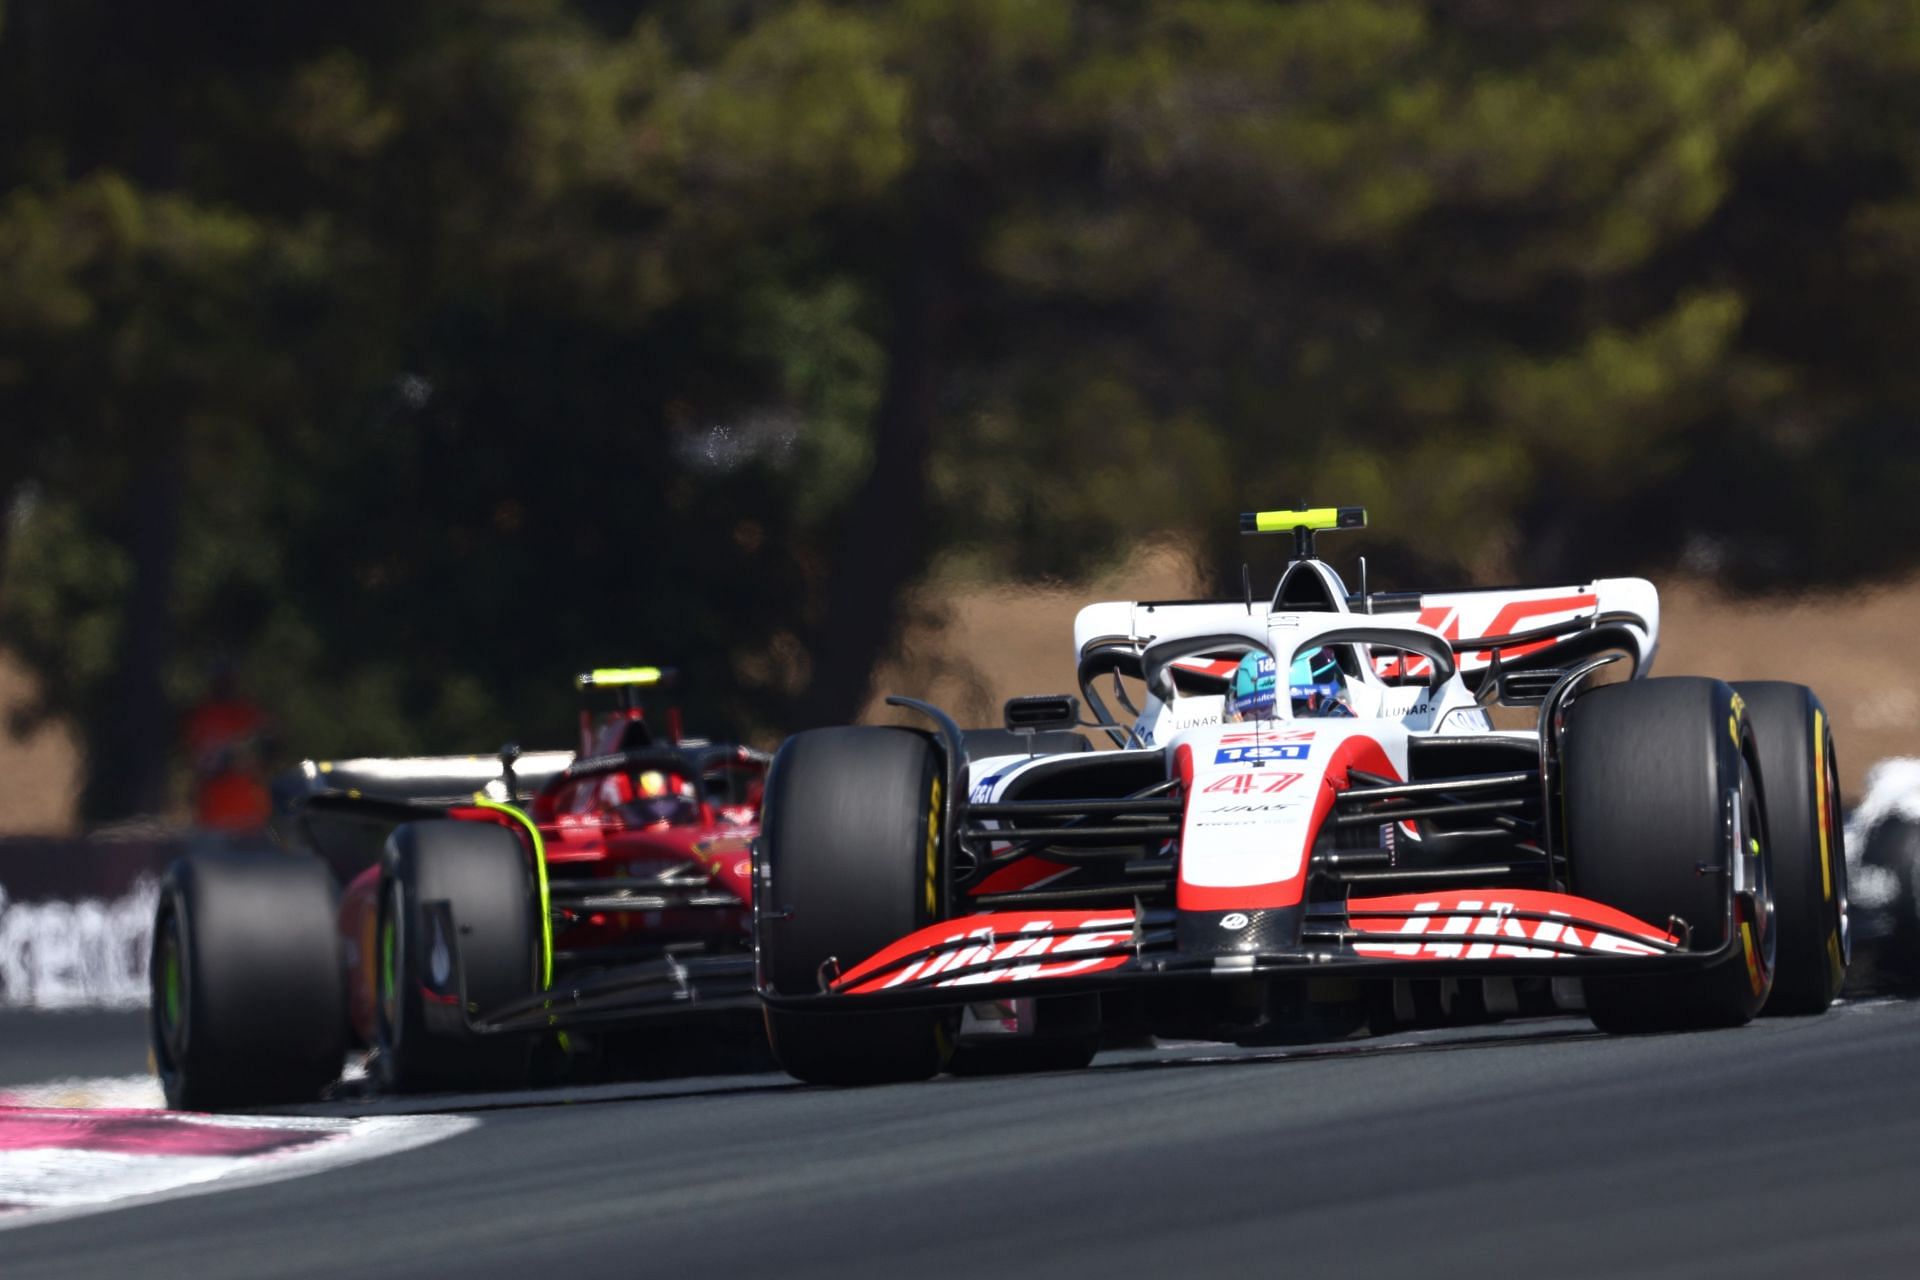 Haas needs a strong weekend for its upgraded car